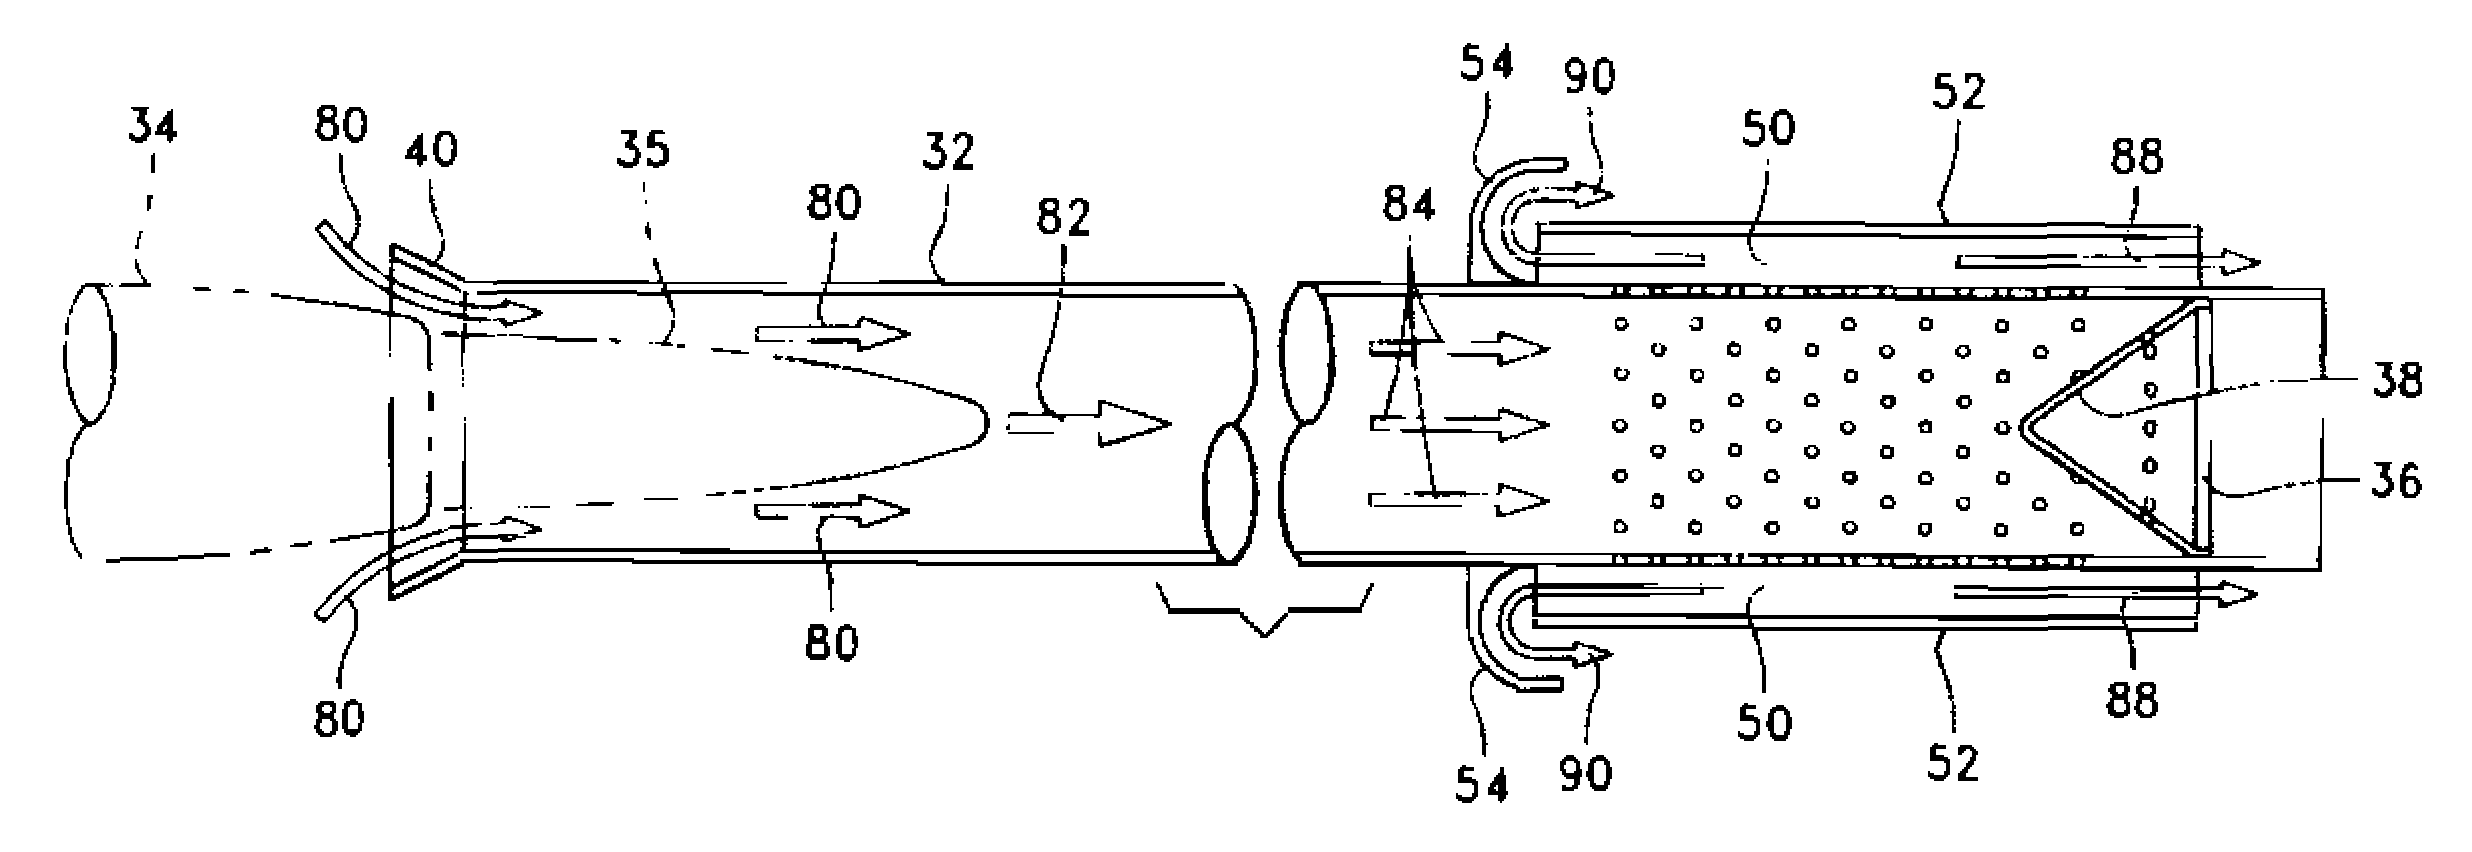 Noise attenuation device for reducing noise attenuation in a jet engine test cell